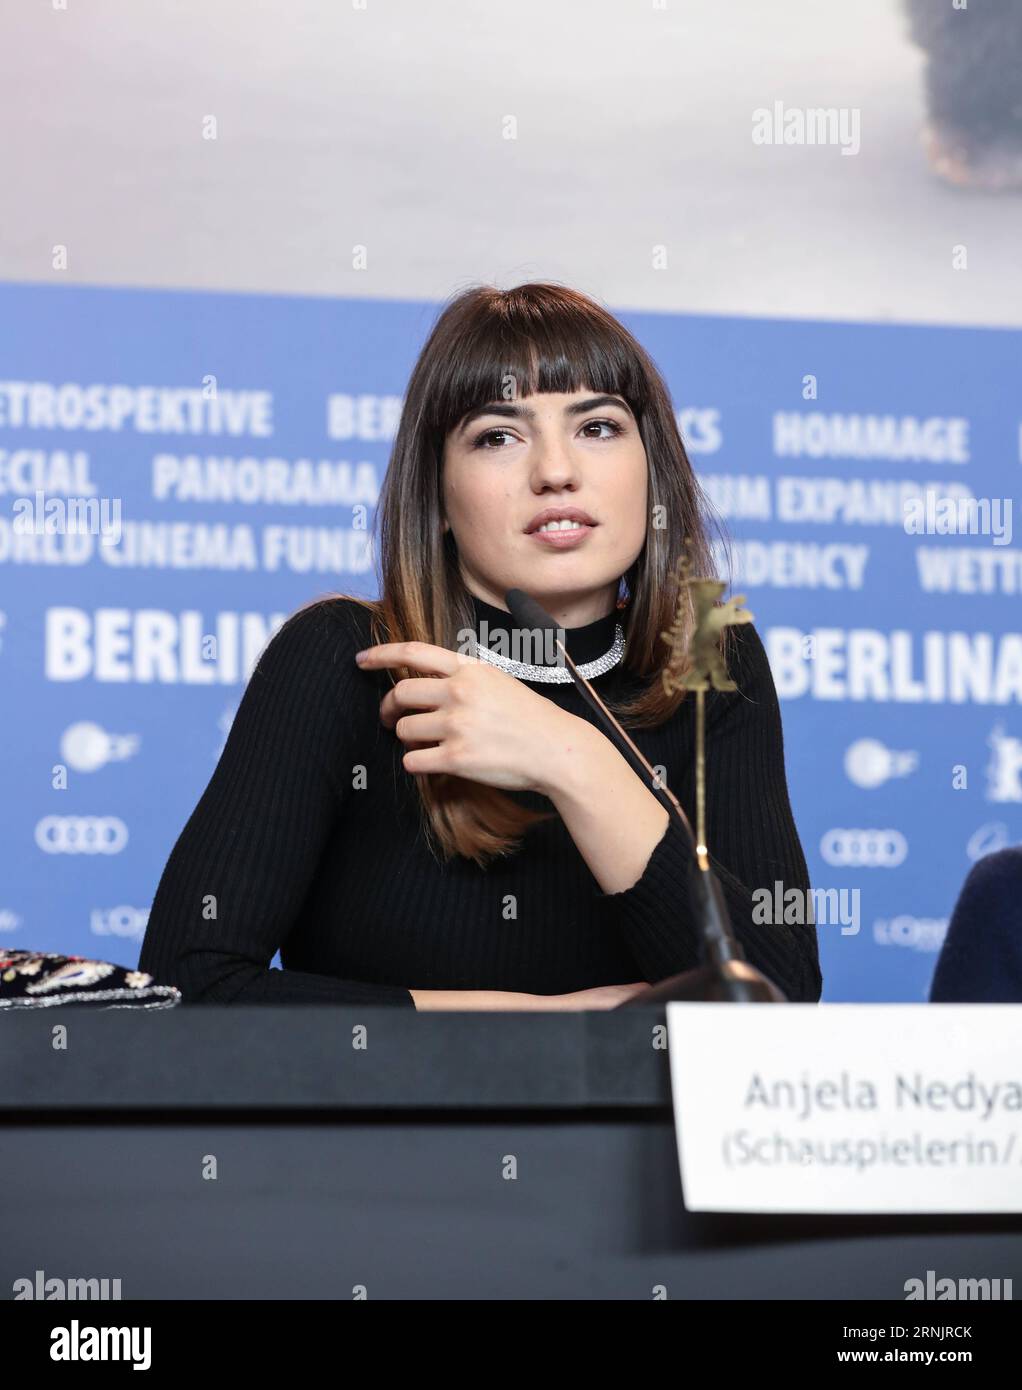 BERLIN, Actress Anjela Nedyalkova of British film T2 Trainspotting attends a press conference during the 67th Berlinale International Film Festival in Berlin, capital of Germany, on Feb. 10, 2017. )(yk) GERMANY-BERLIN-67TH BERLINALE- T2 TRAINSPOTTING ShanxYuqi PUBLICATIONxNOTxINxCHN   Berlin actress Anjela  of British Film T2 Trainspotting Attends a Press Conference during The 67th Berlinale International Film Festival in Berlin Capital of Germany ON Feb 10 2017 YK Germany Berlin 67th Berlinale T2 Trainspotting  PUBLICATIONxNOTxINxCHN Stock Photo